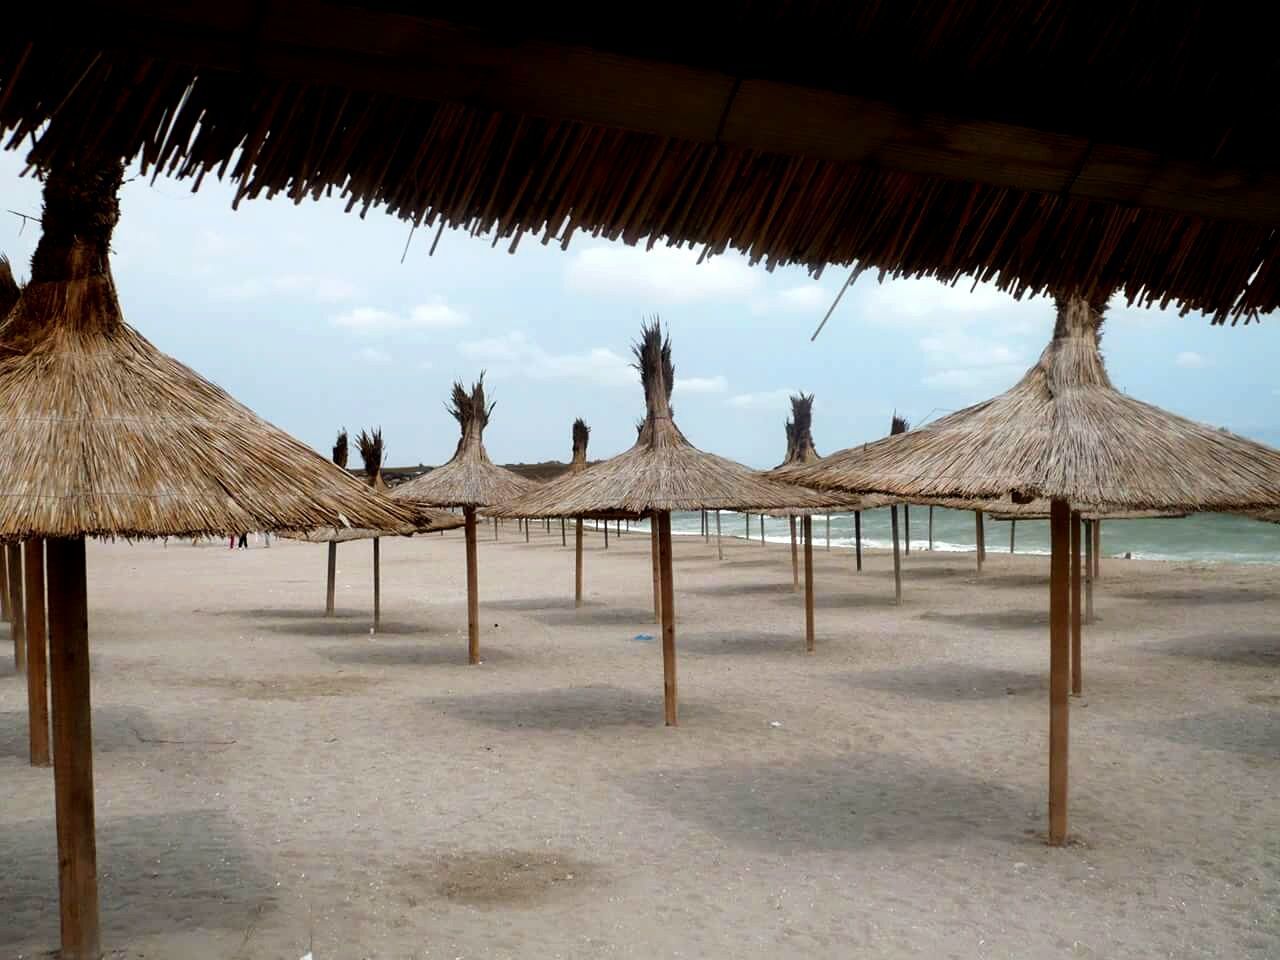 Thatched roof shades on beach